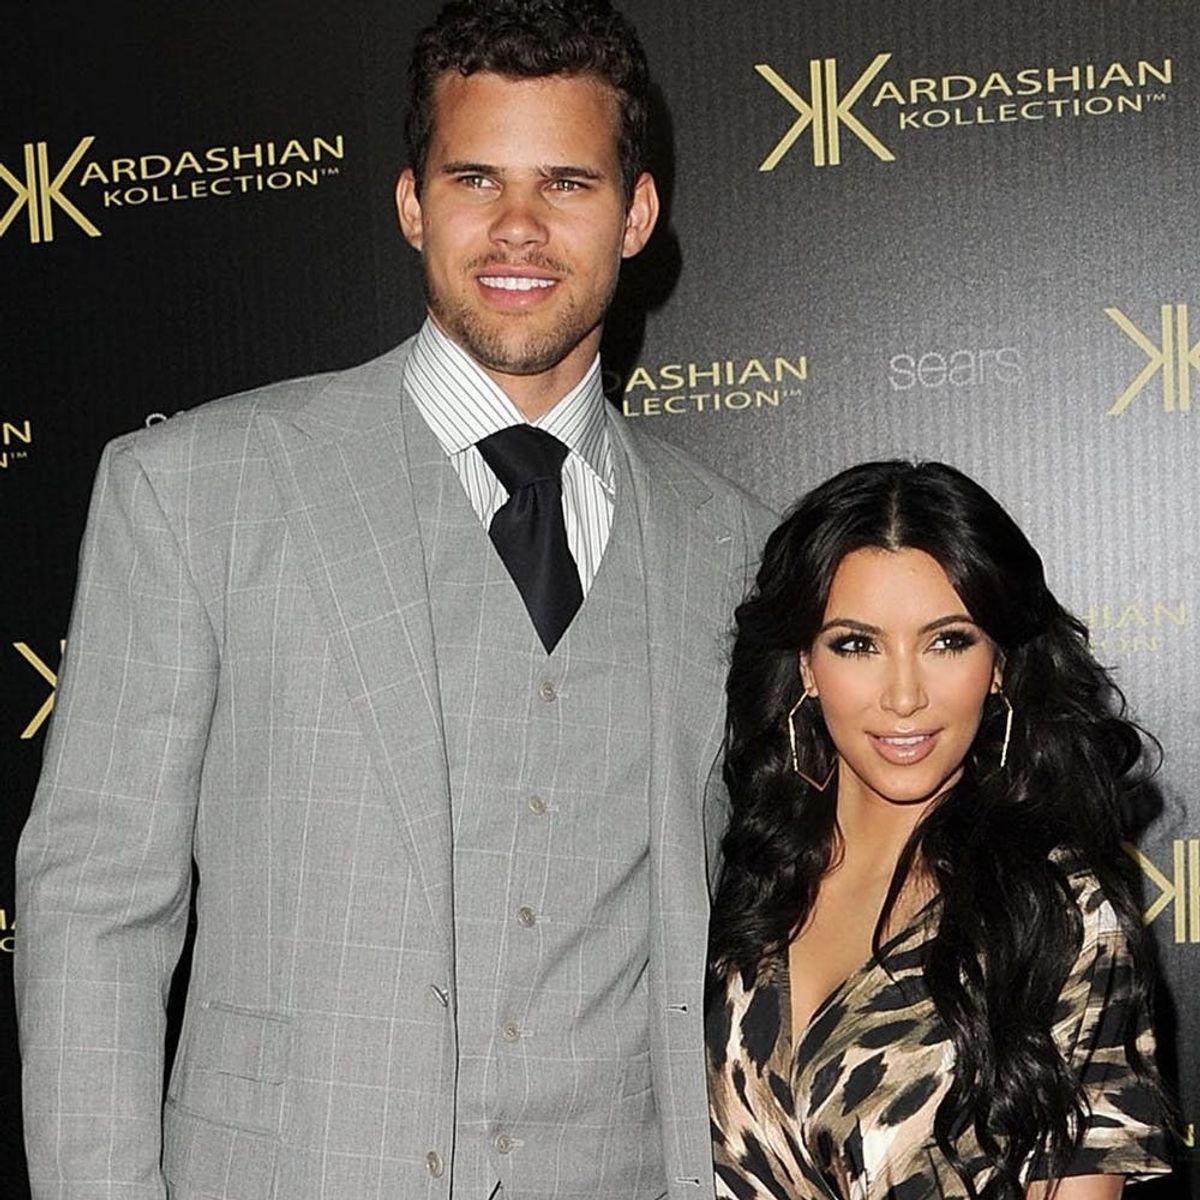 Kim Kardashian West Says Her Mother Had Serious Doubts About Her Wedding to Kris Humphries